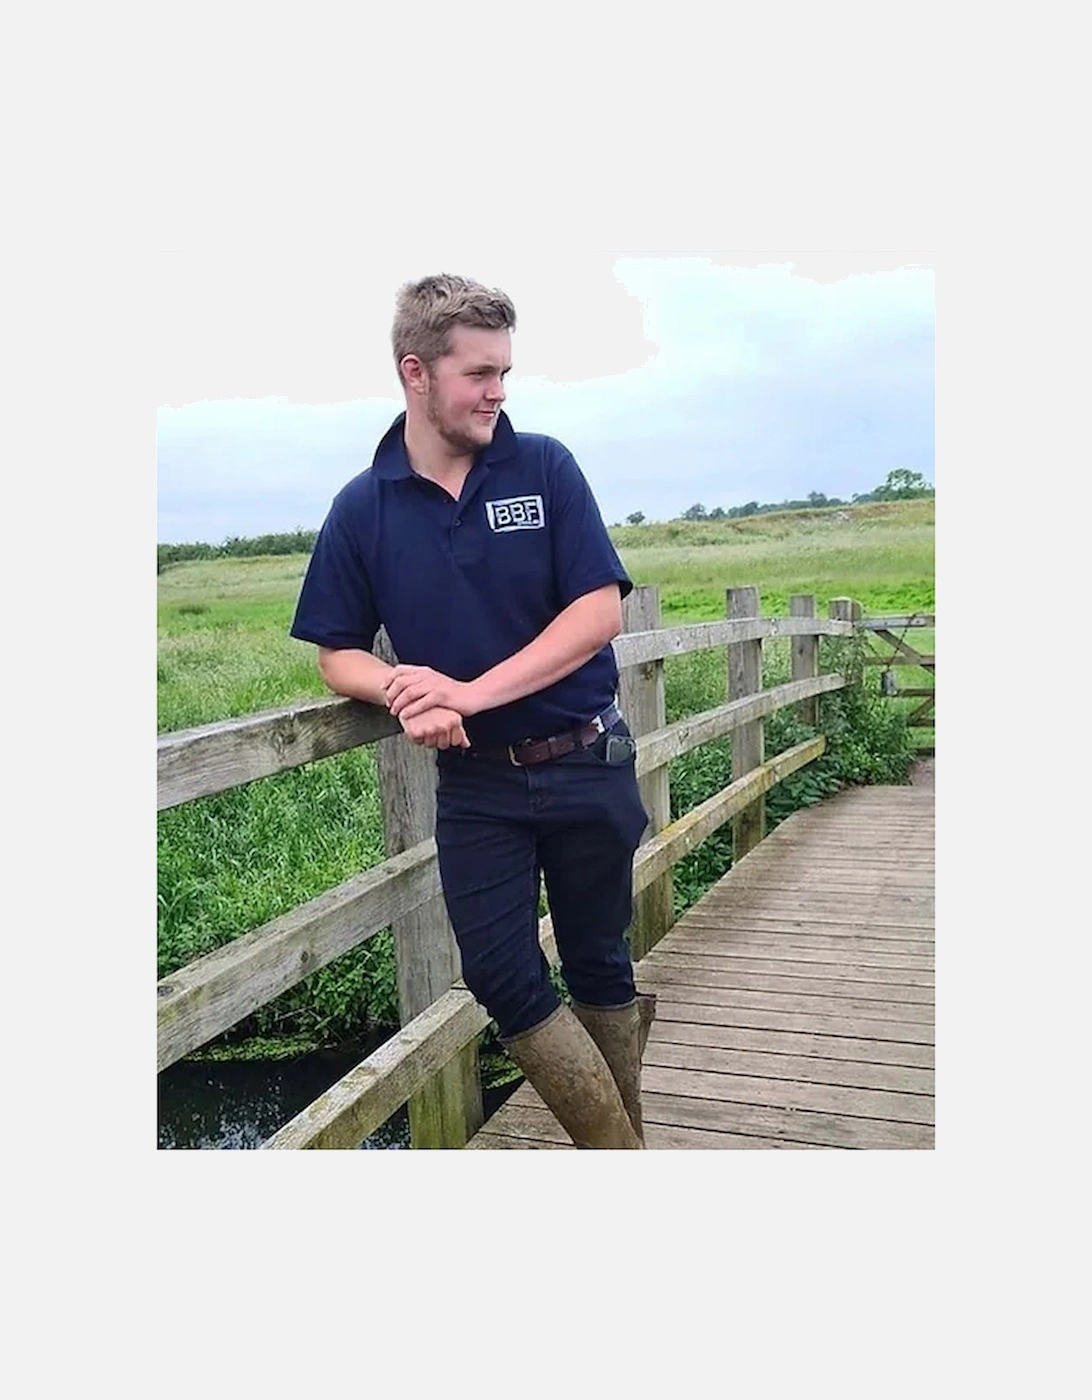 Back British Farming Men's Support Our Standards Buy British Polo Shirt Navy